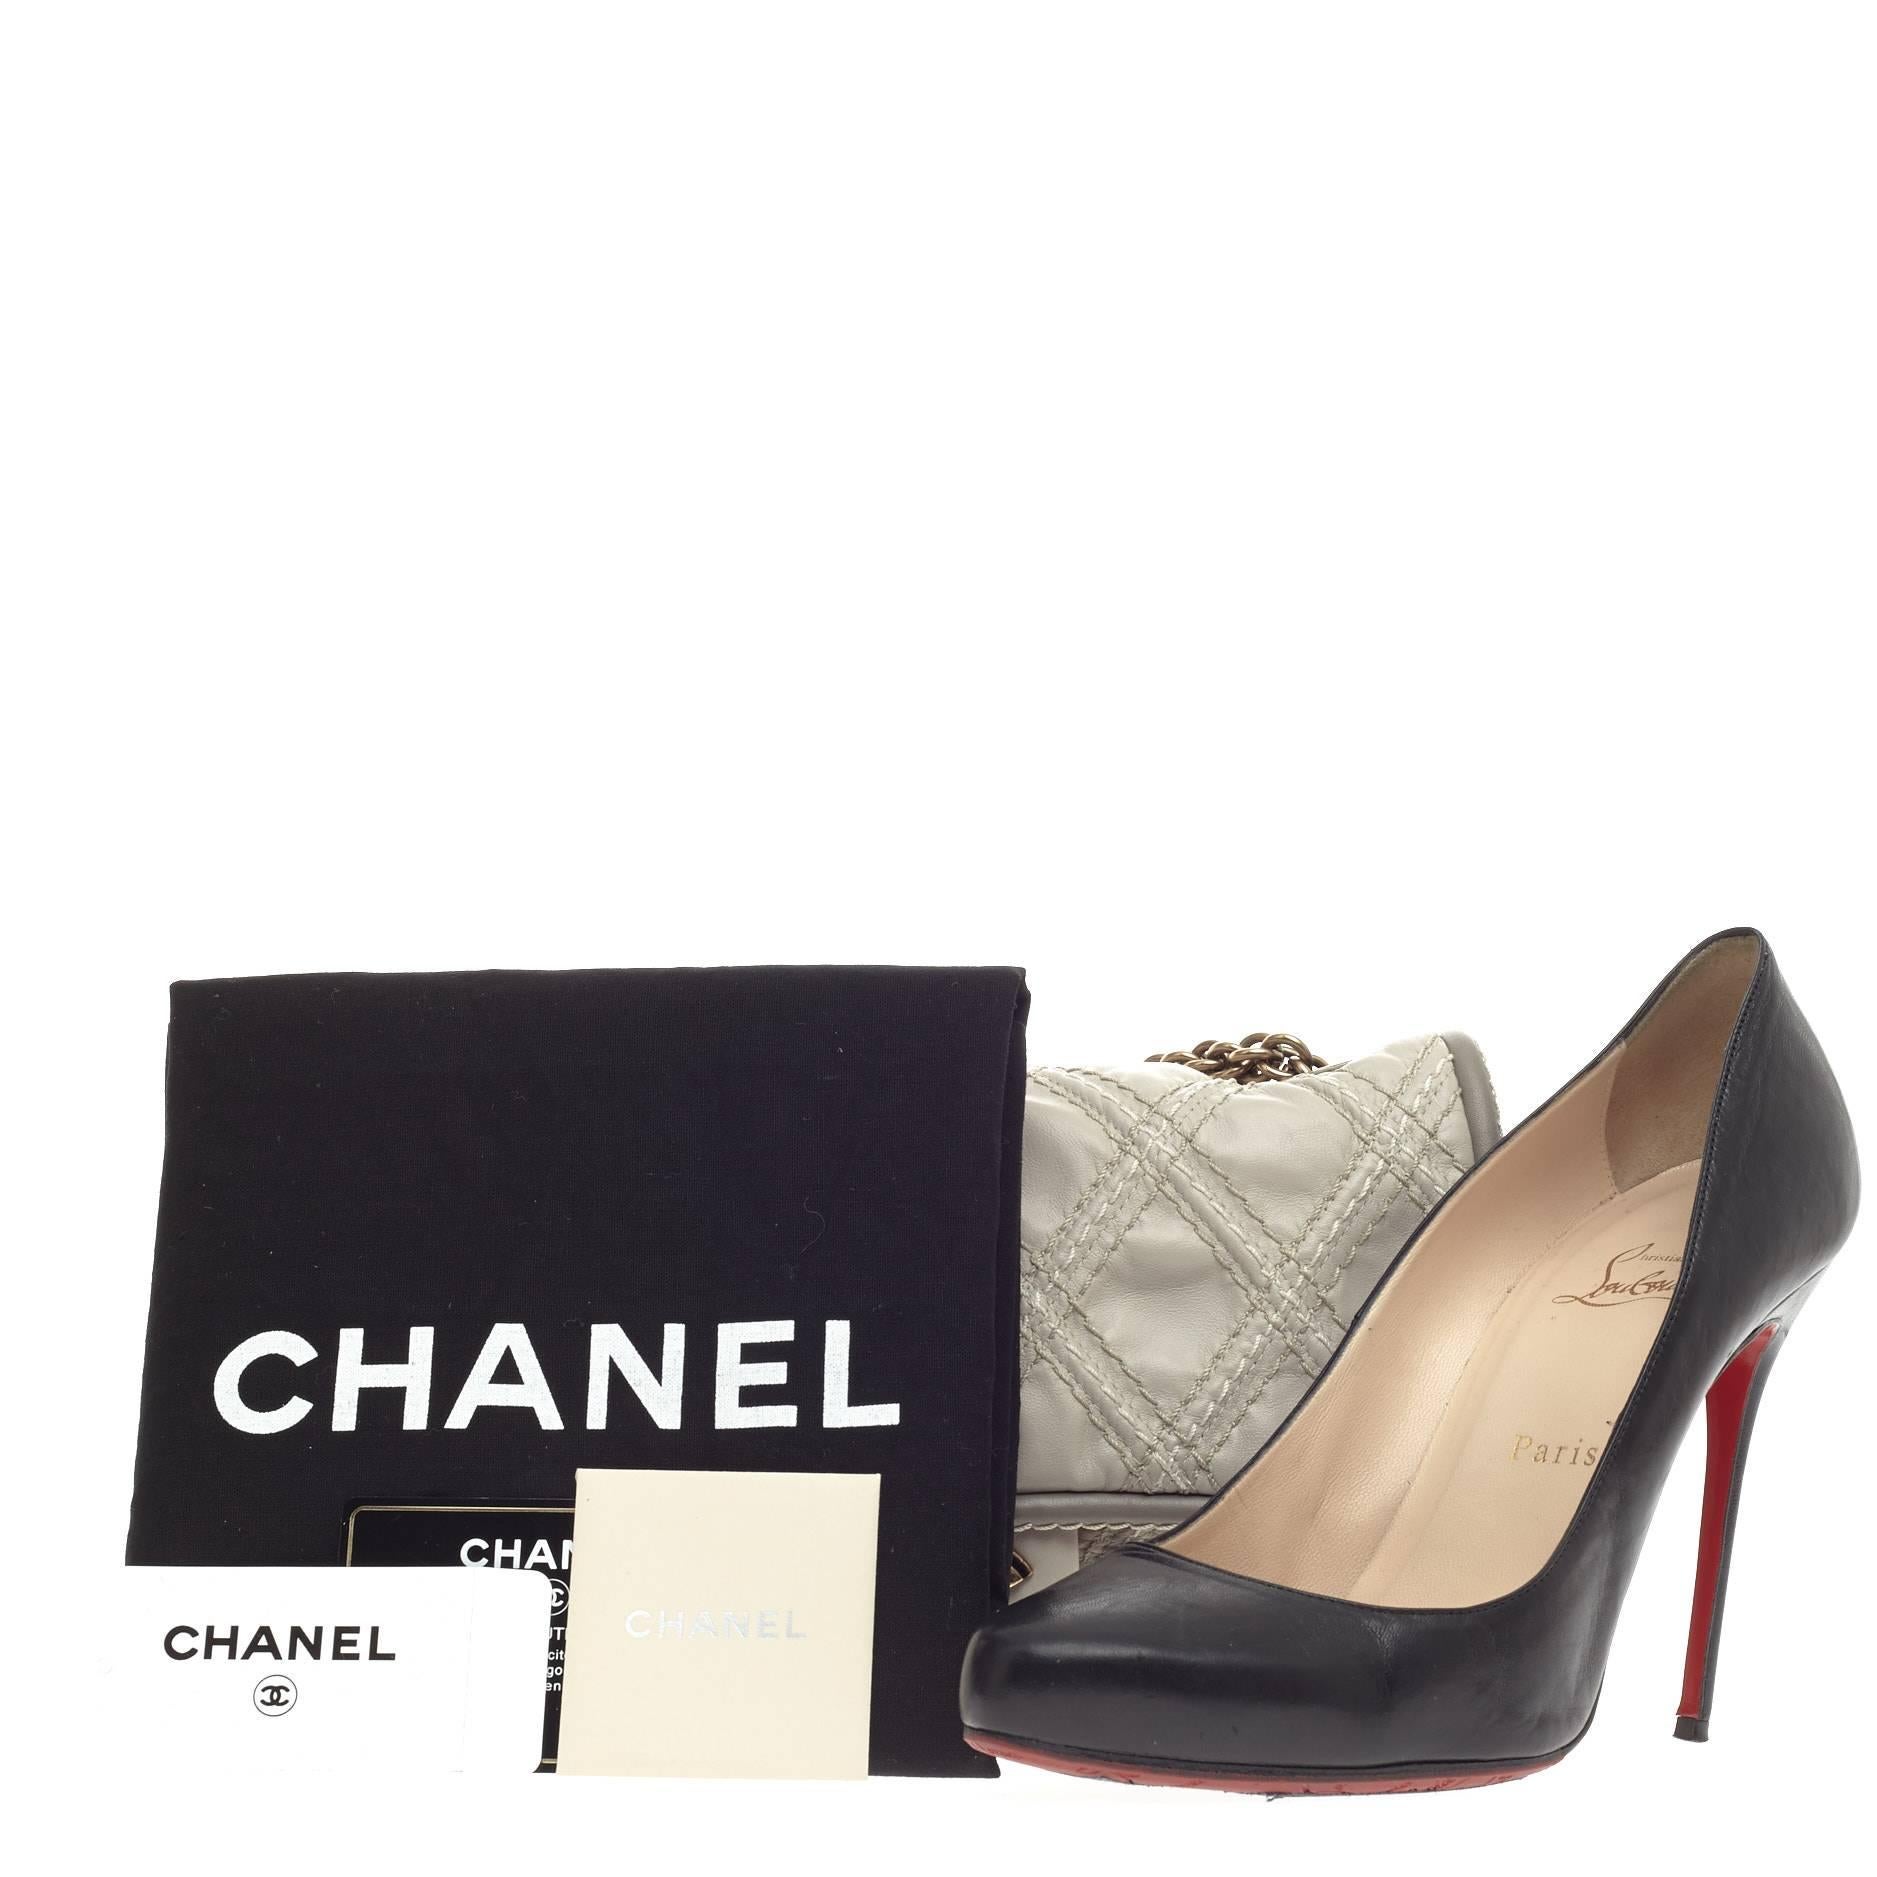 This authentic Chanel Triptych Flap Quilted Calfskin Small is sure to compliment just about every casual outfit. Crafted from light beige calfskin leather, this modern-style flap features triad diamond quilted stitching, Chanel reissue chain link